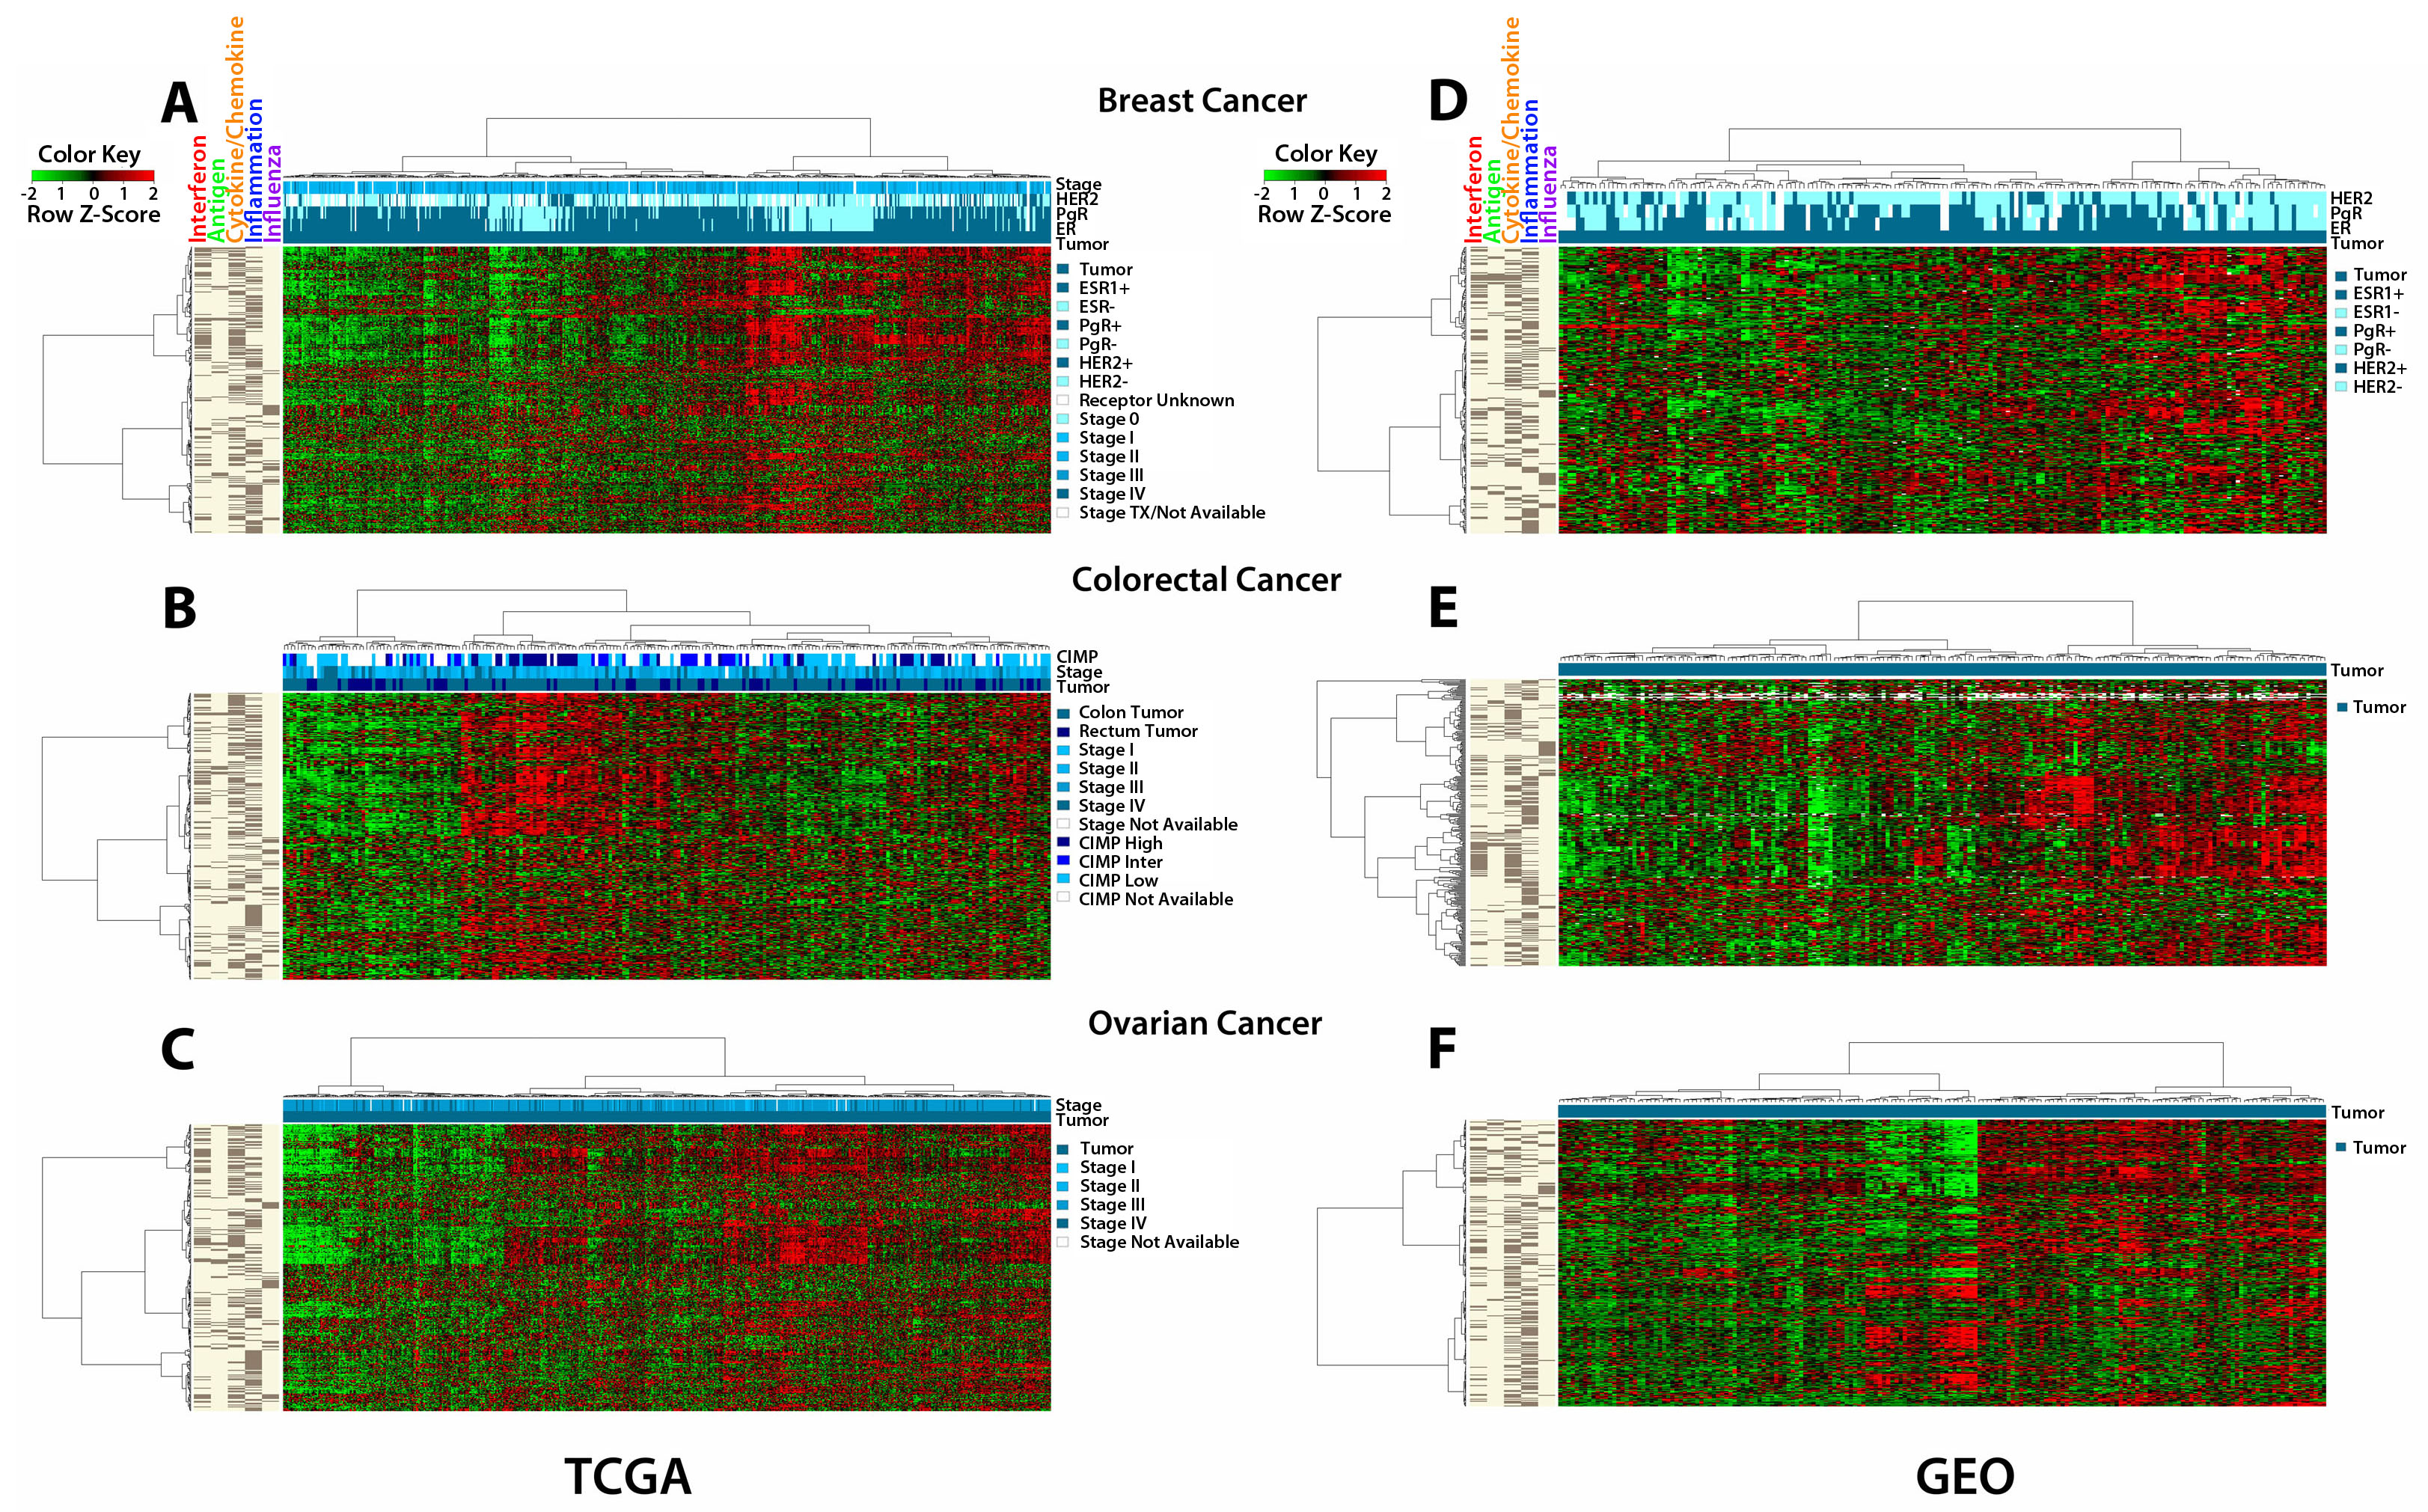 The AIM 317 gene panel clusters TCGA and GEO tumors into high and low immune signatures.